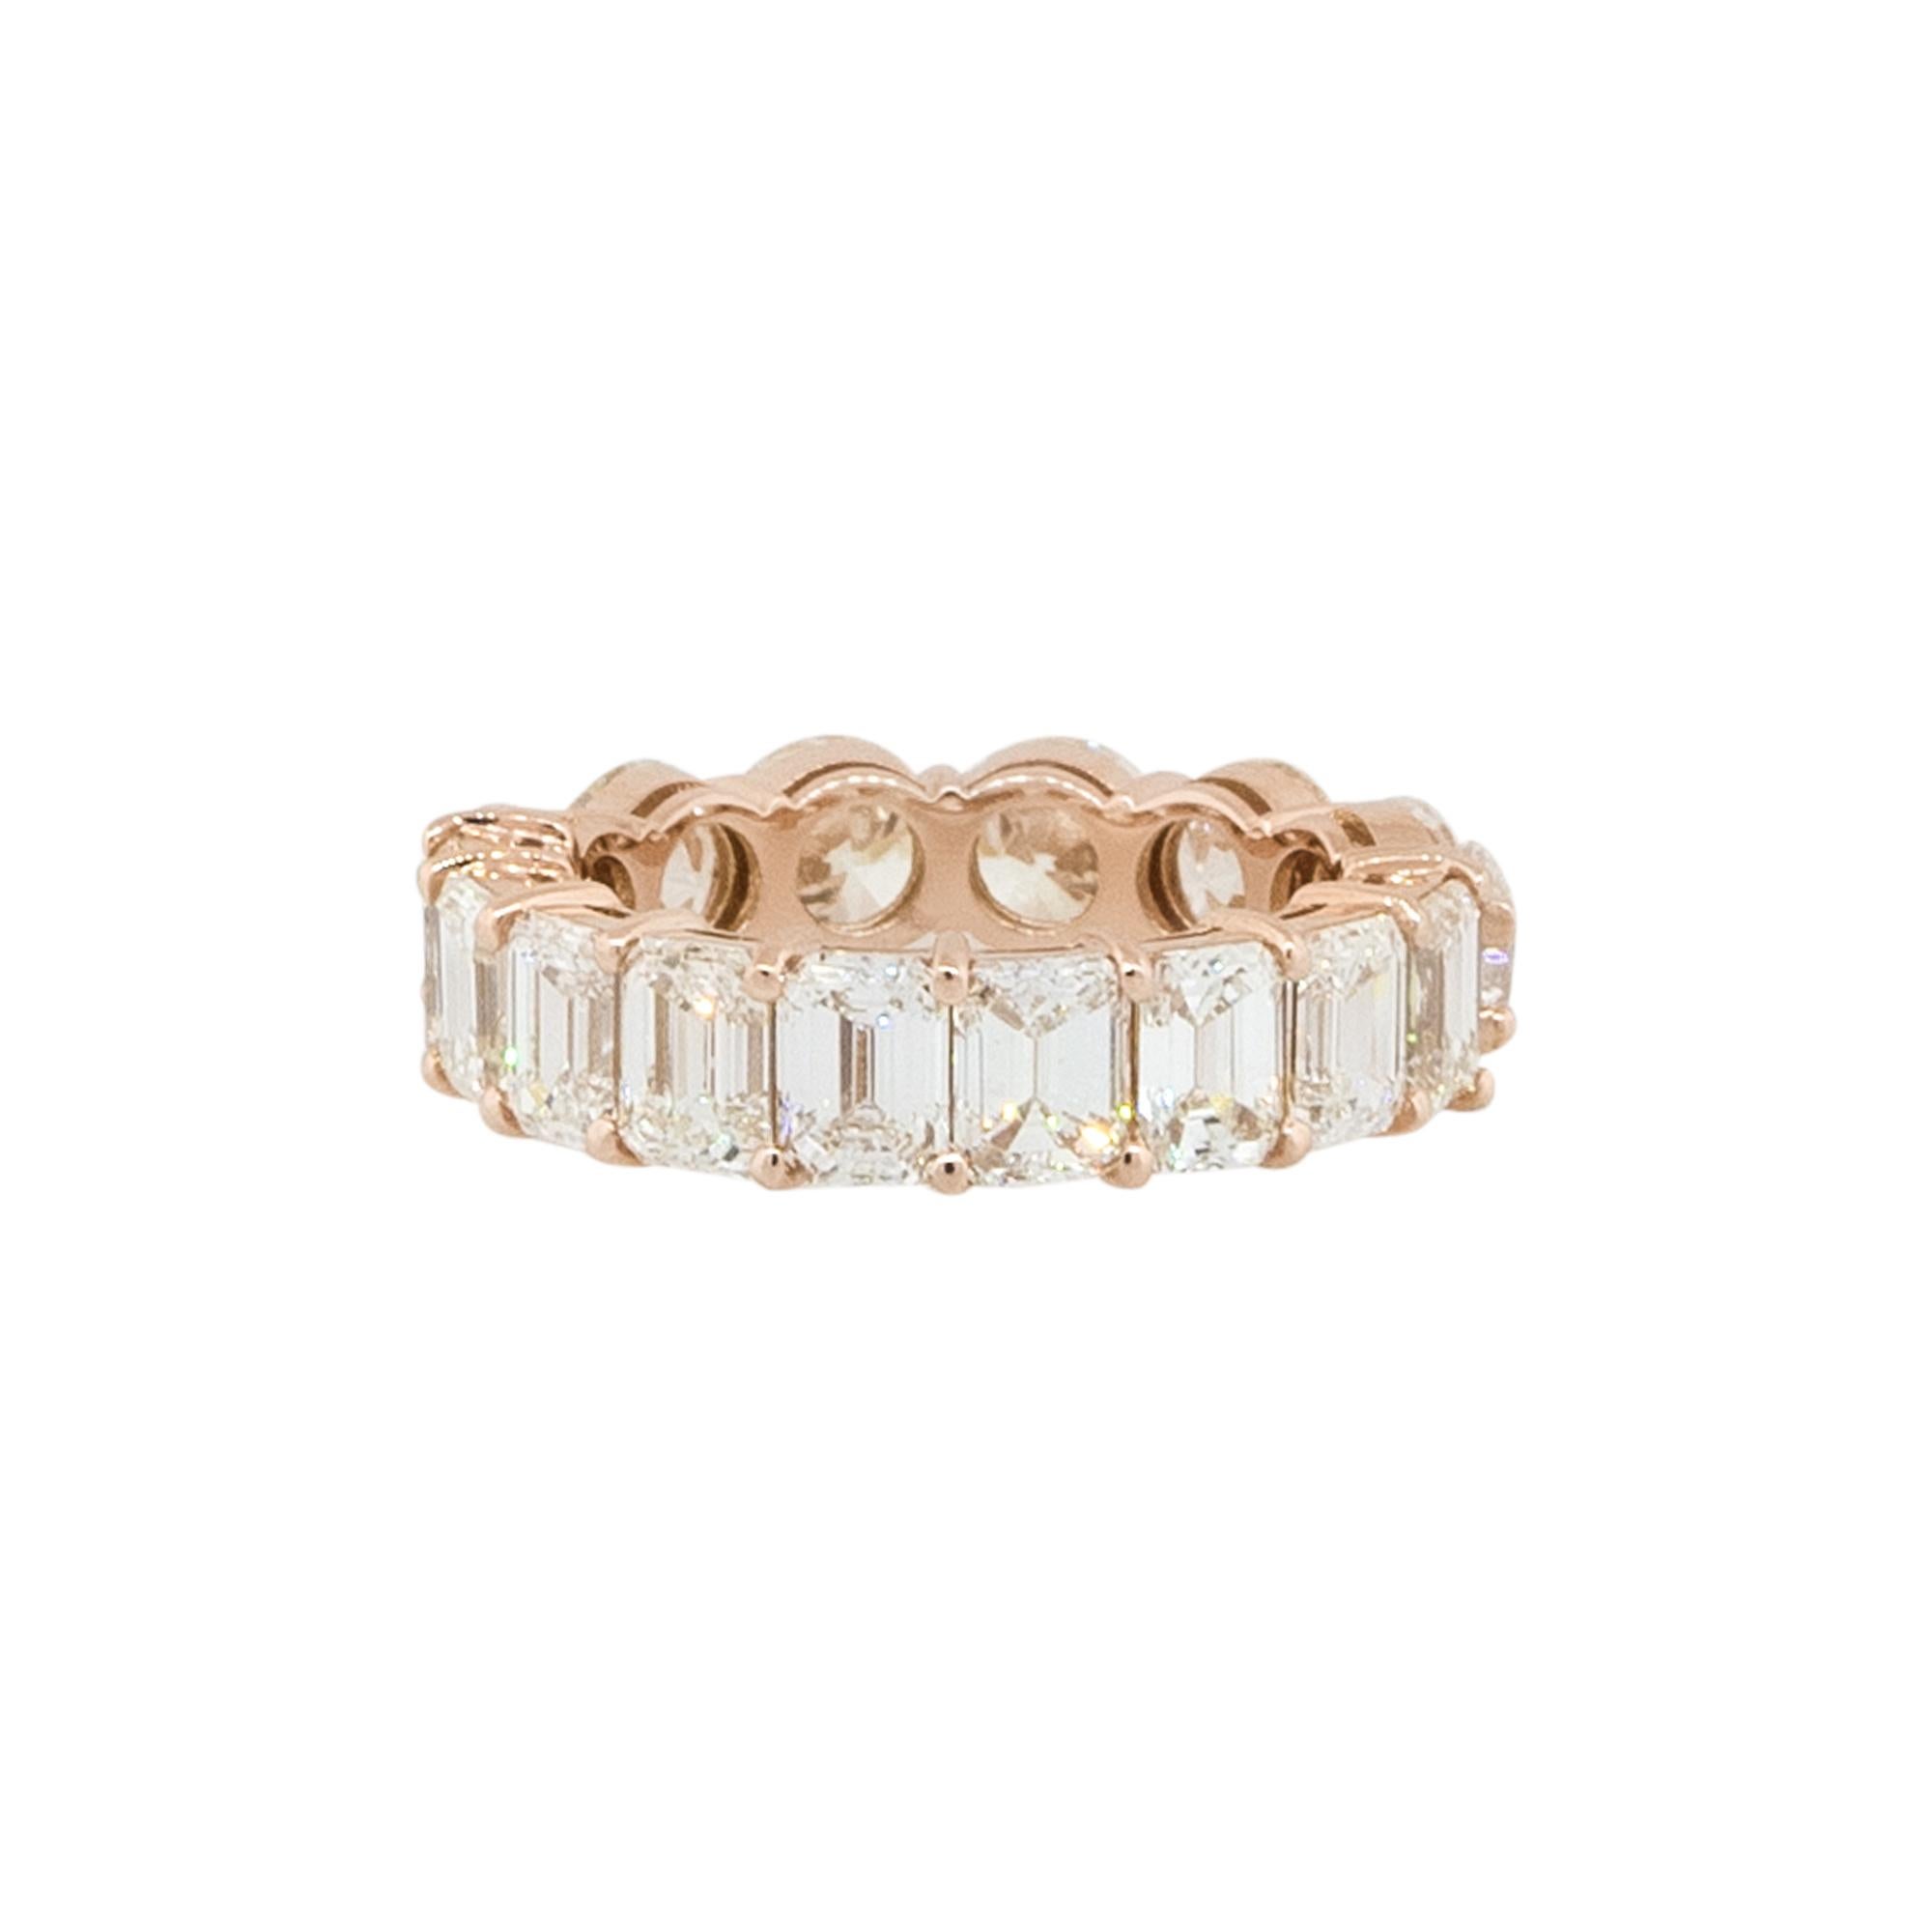 14k Rose Gold 7.37ctw Round and Emerald Cut Diamond Eternity Band Ring

Material: 14k Rose Gold
Diamond Details: Approx. 7.37ctw of Round Brilliant and Emerald Cut Diamonds. There are 16 Diamonds total. Diamonds are G/H in color and VS in